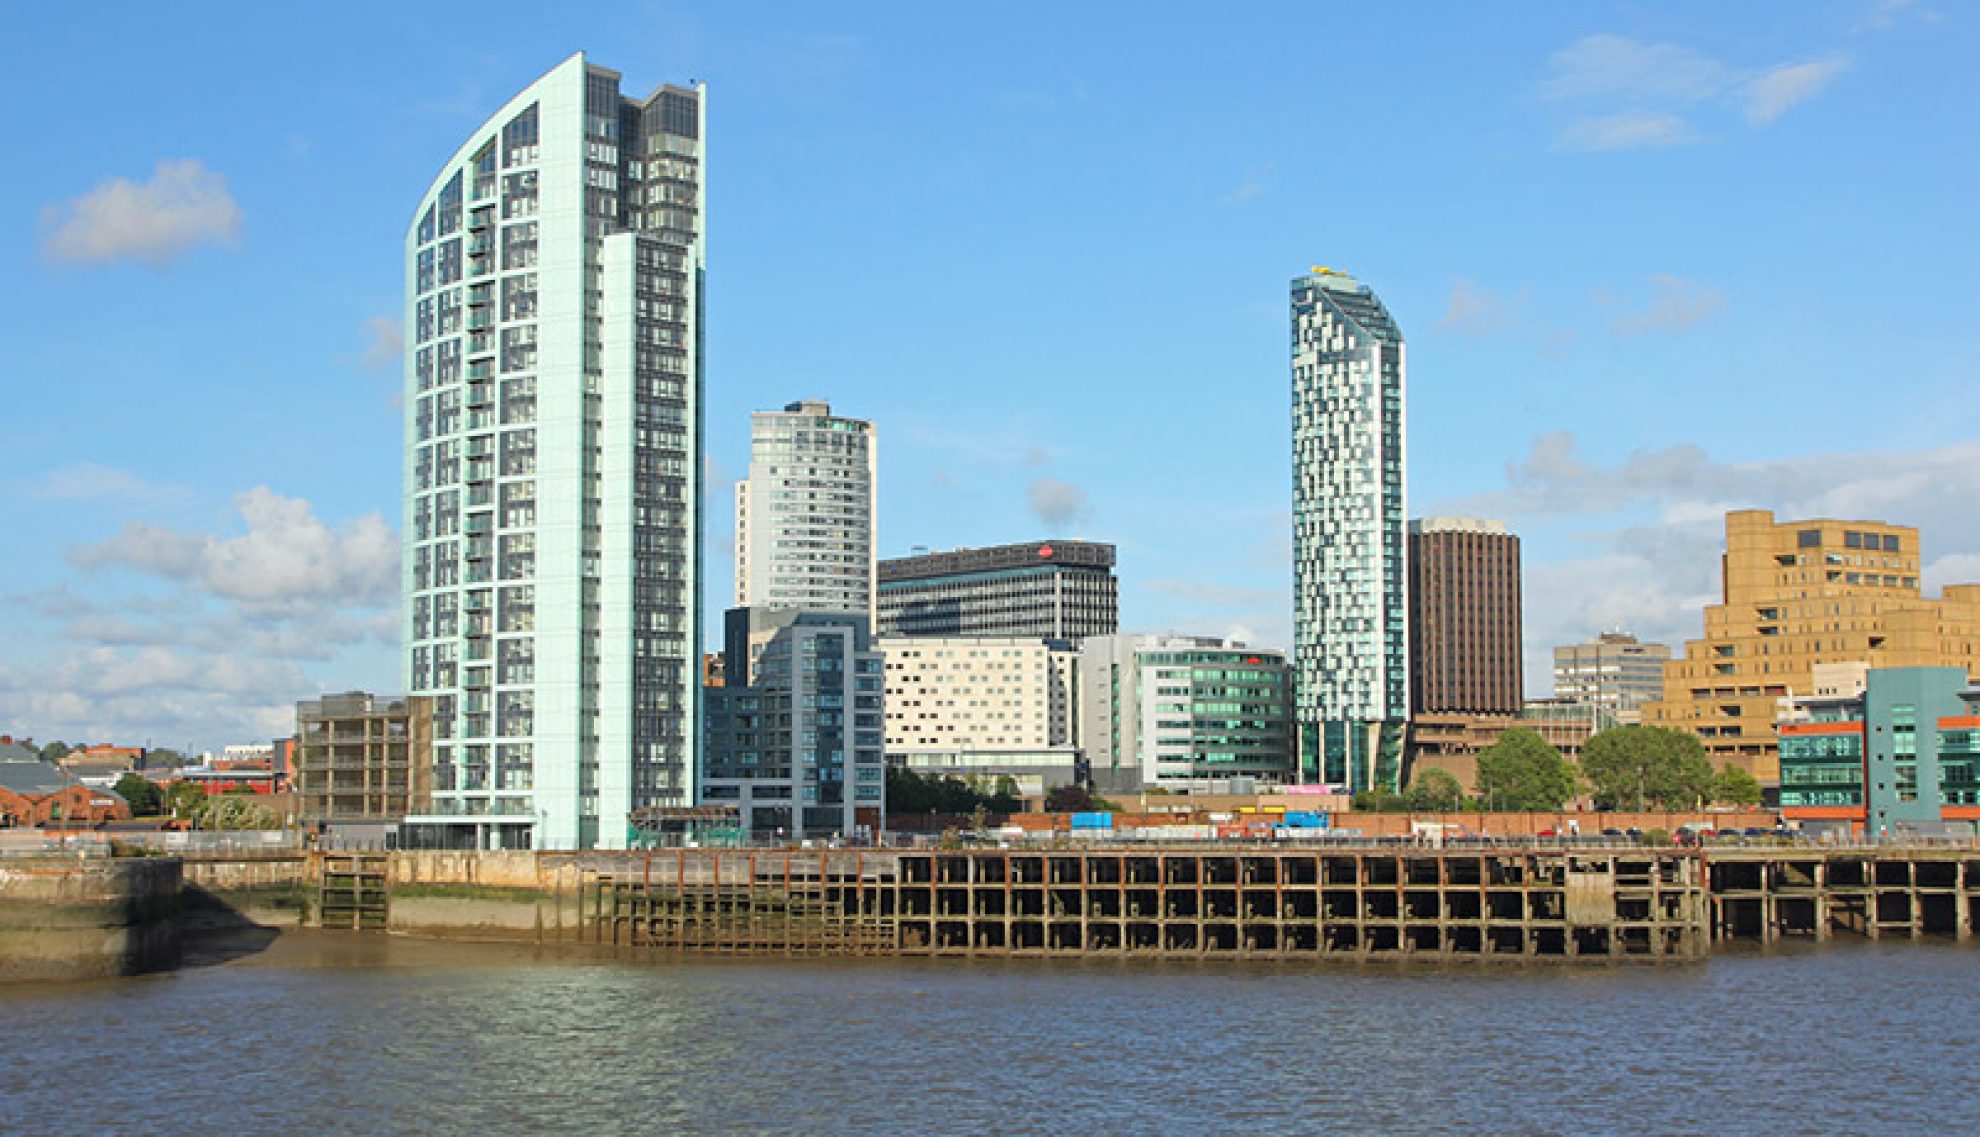 River view with Alexandra tower in the background